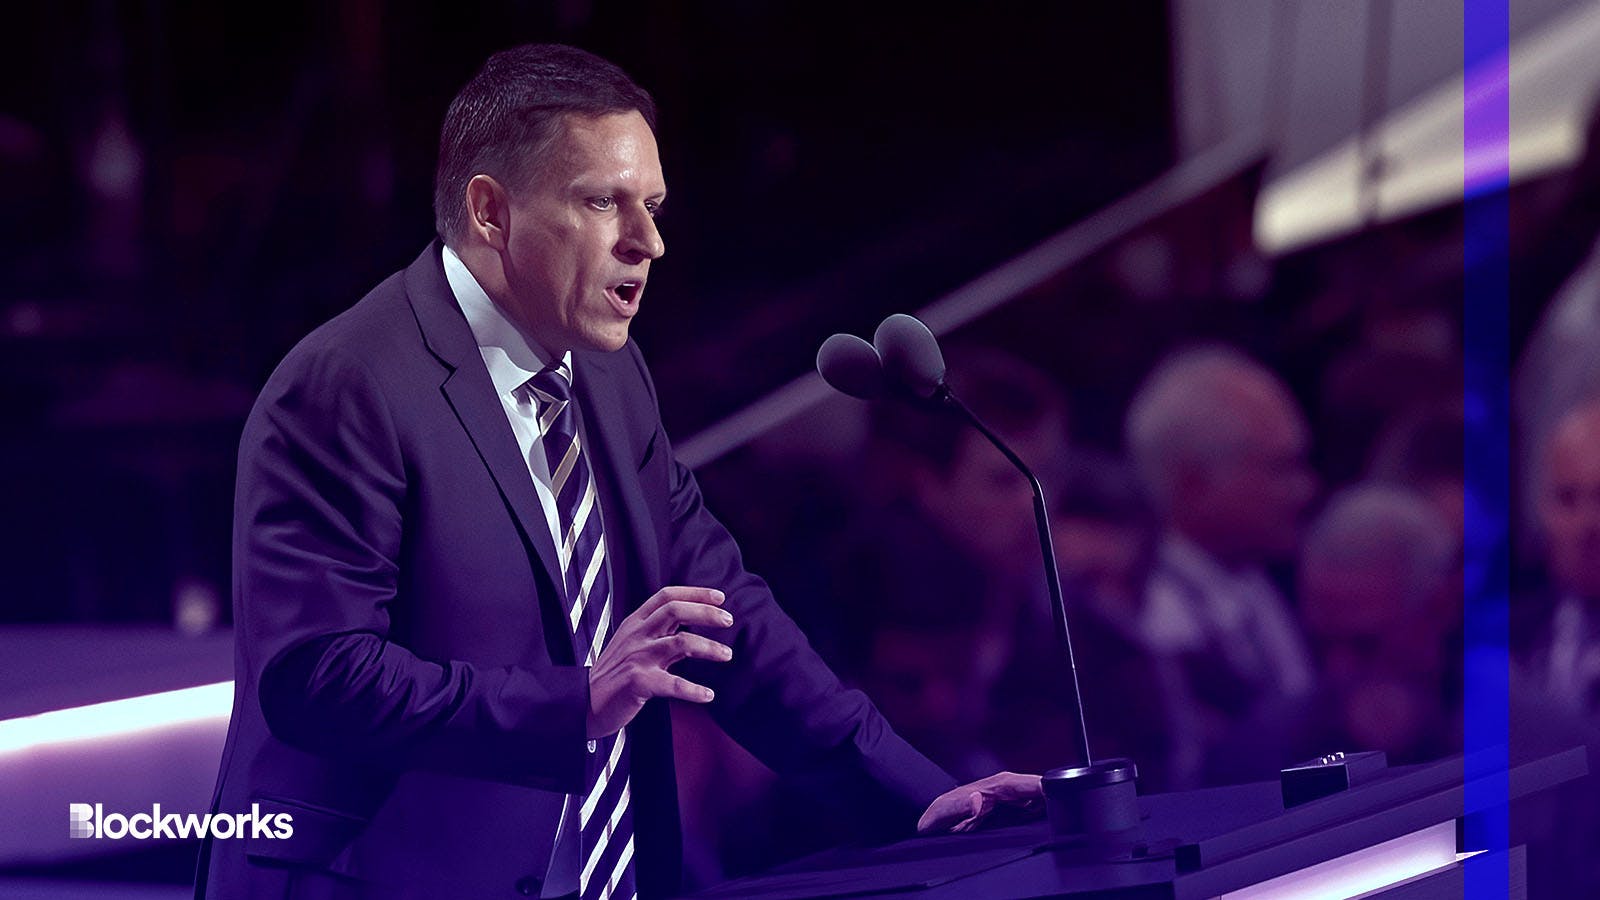 Peter Thiel's venture capital firm made $1.8 billion from cryptocurrencies